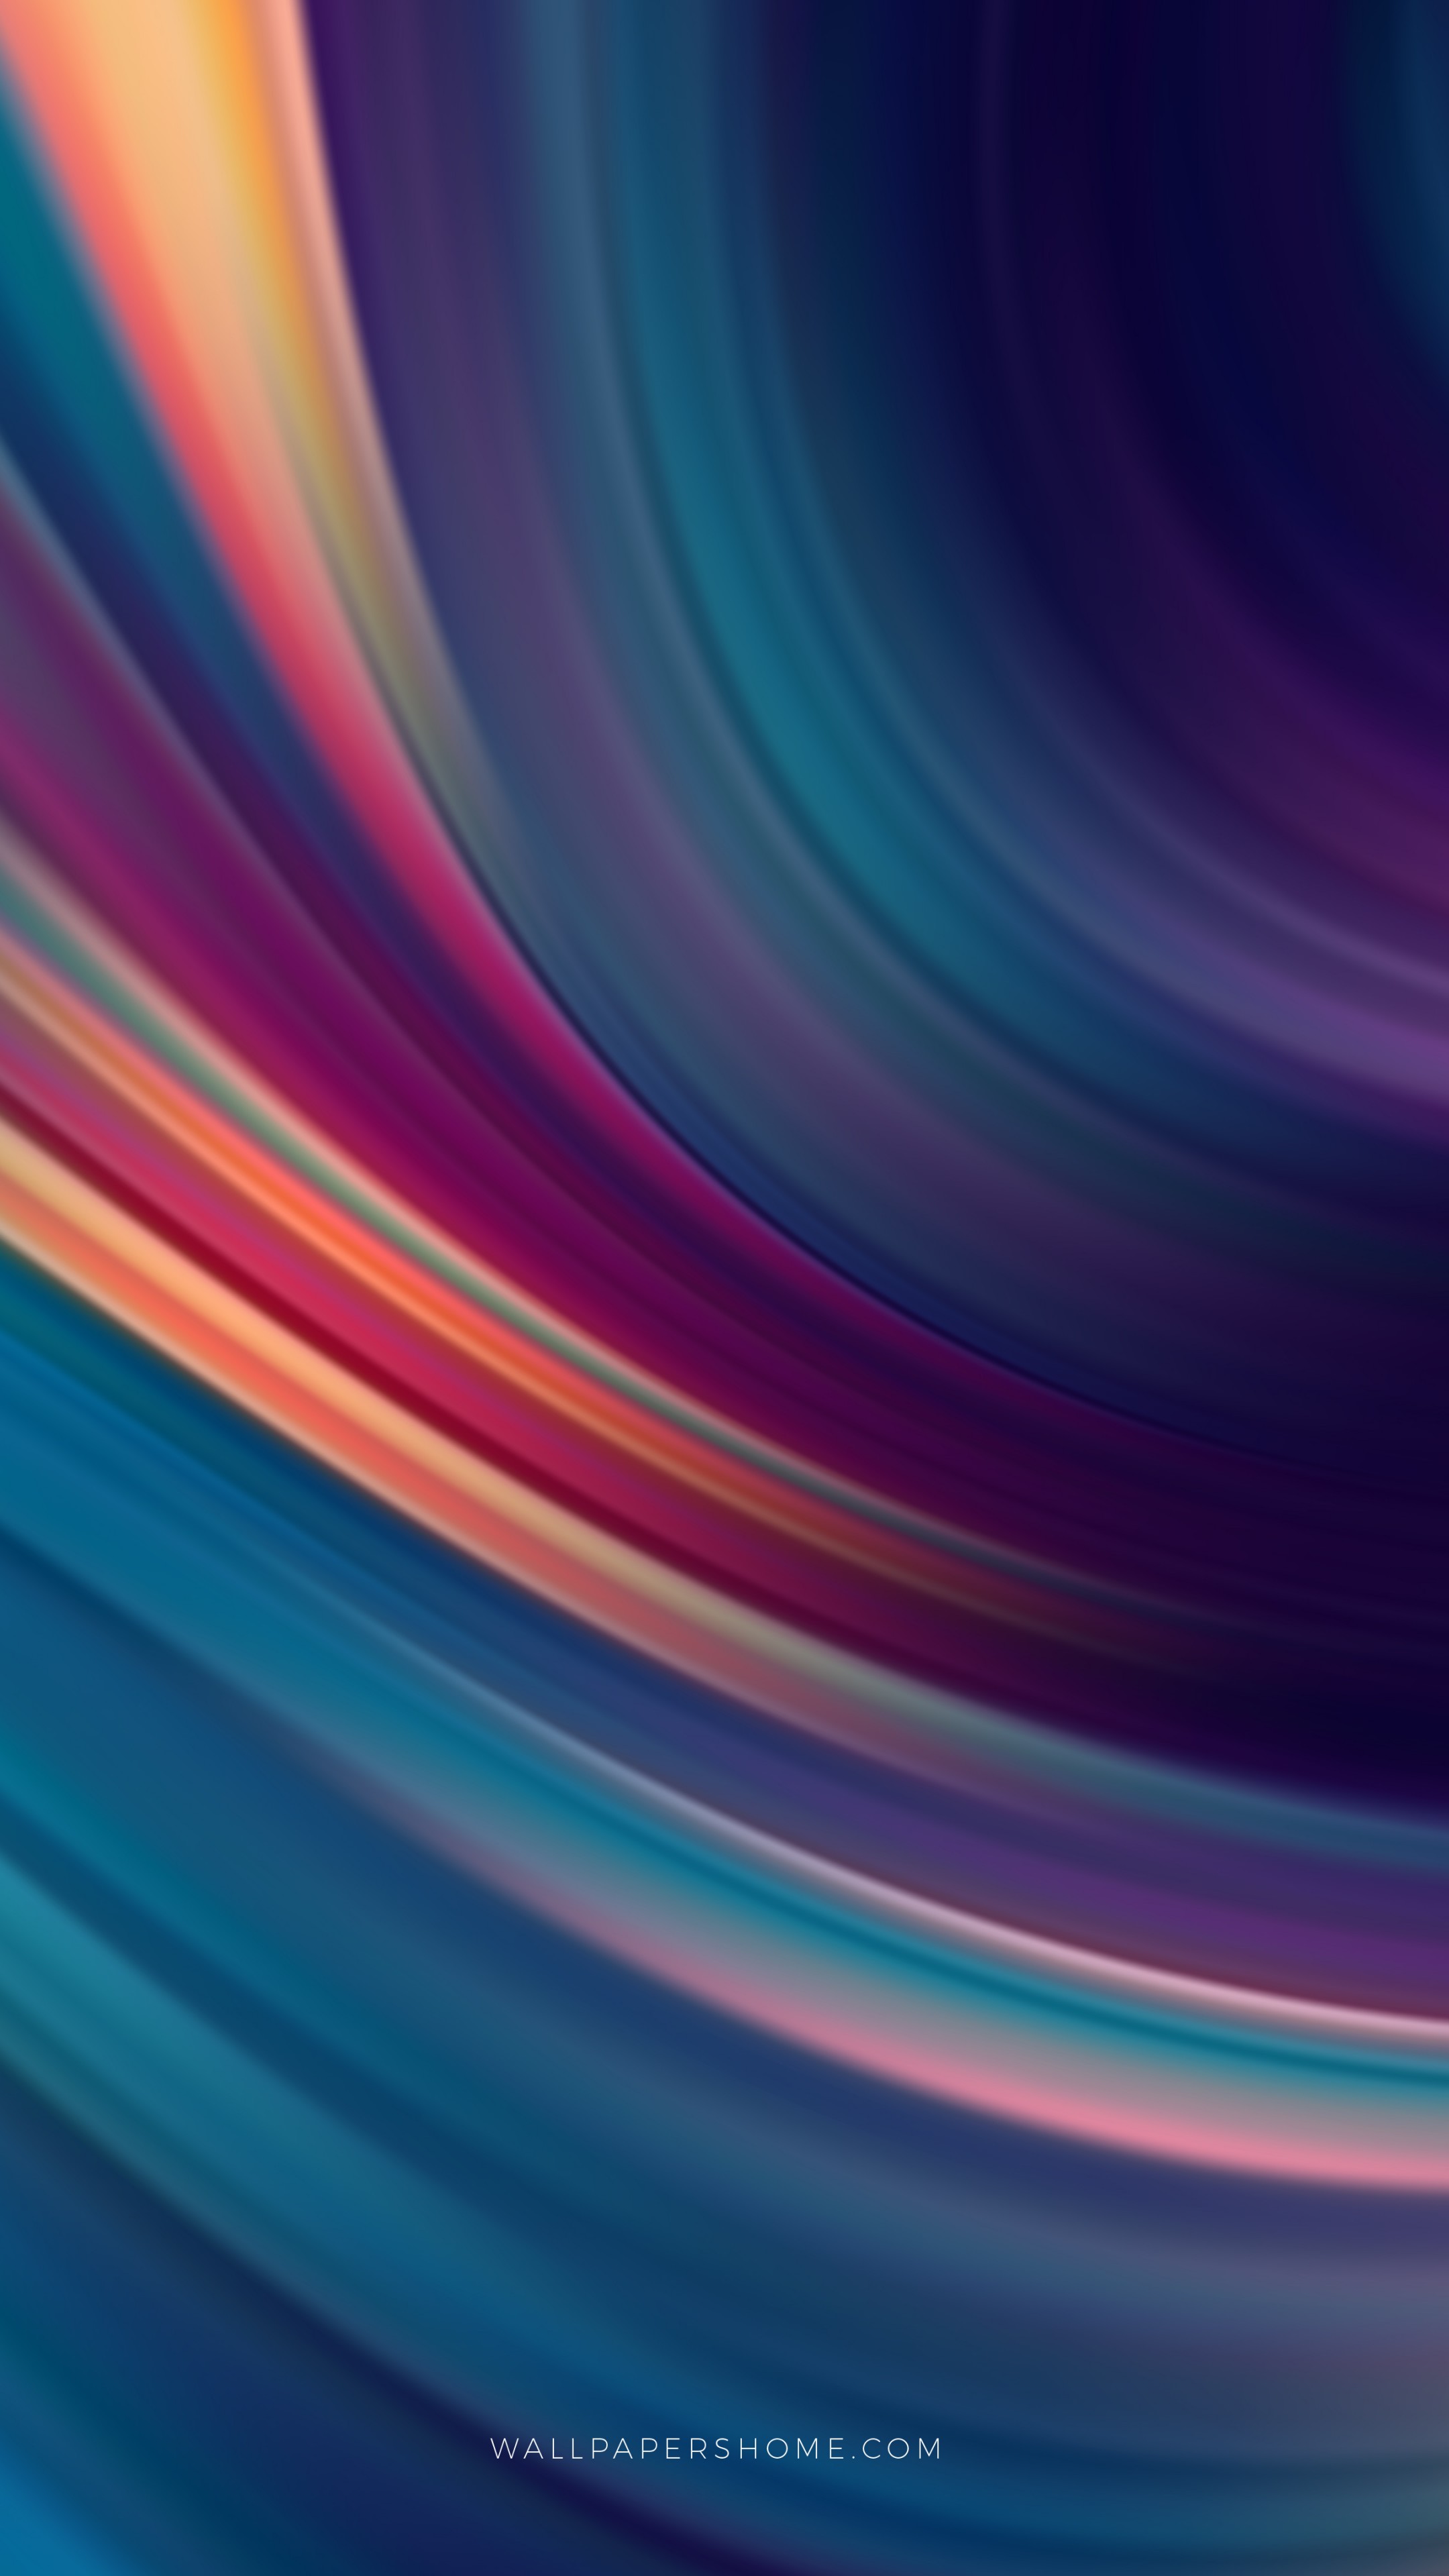 Previous Wallpaper - Hd Abstract , HD Wallpaper & Backgrounds